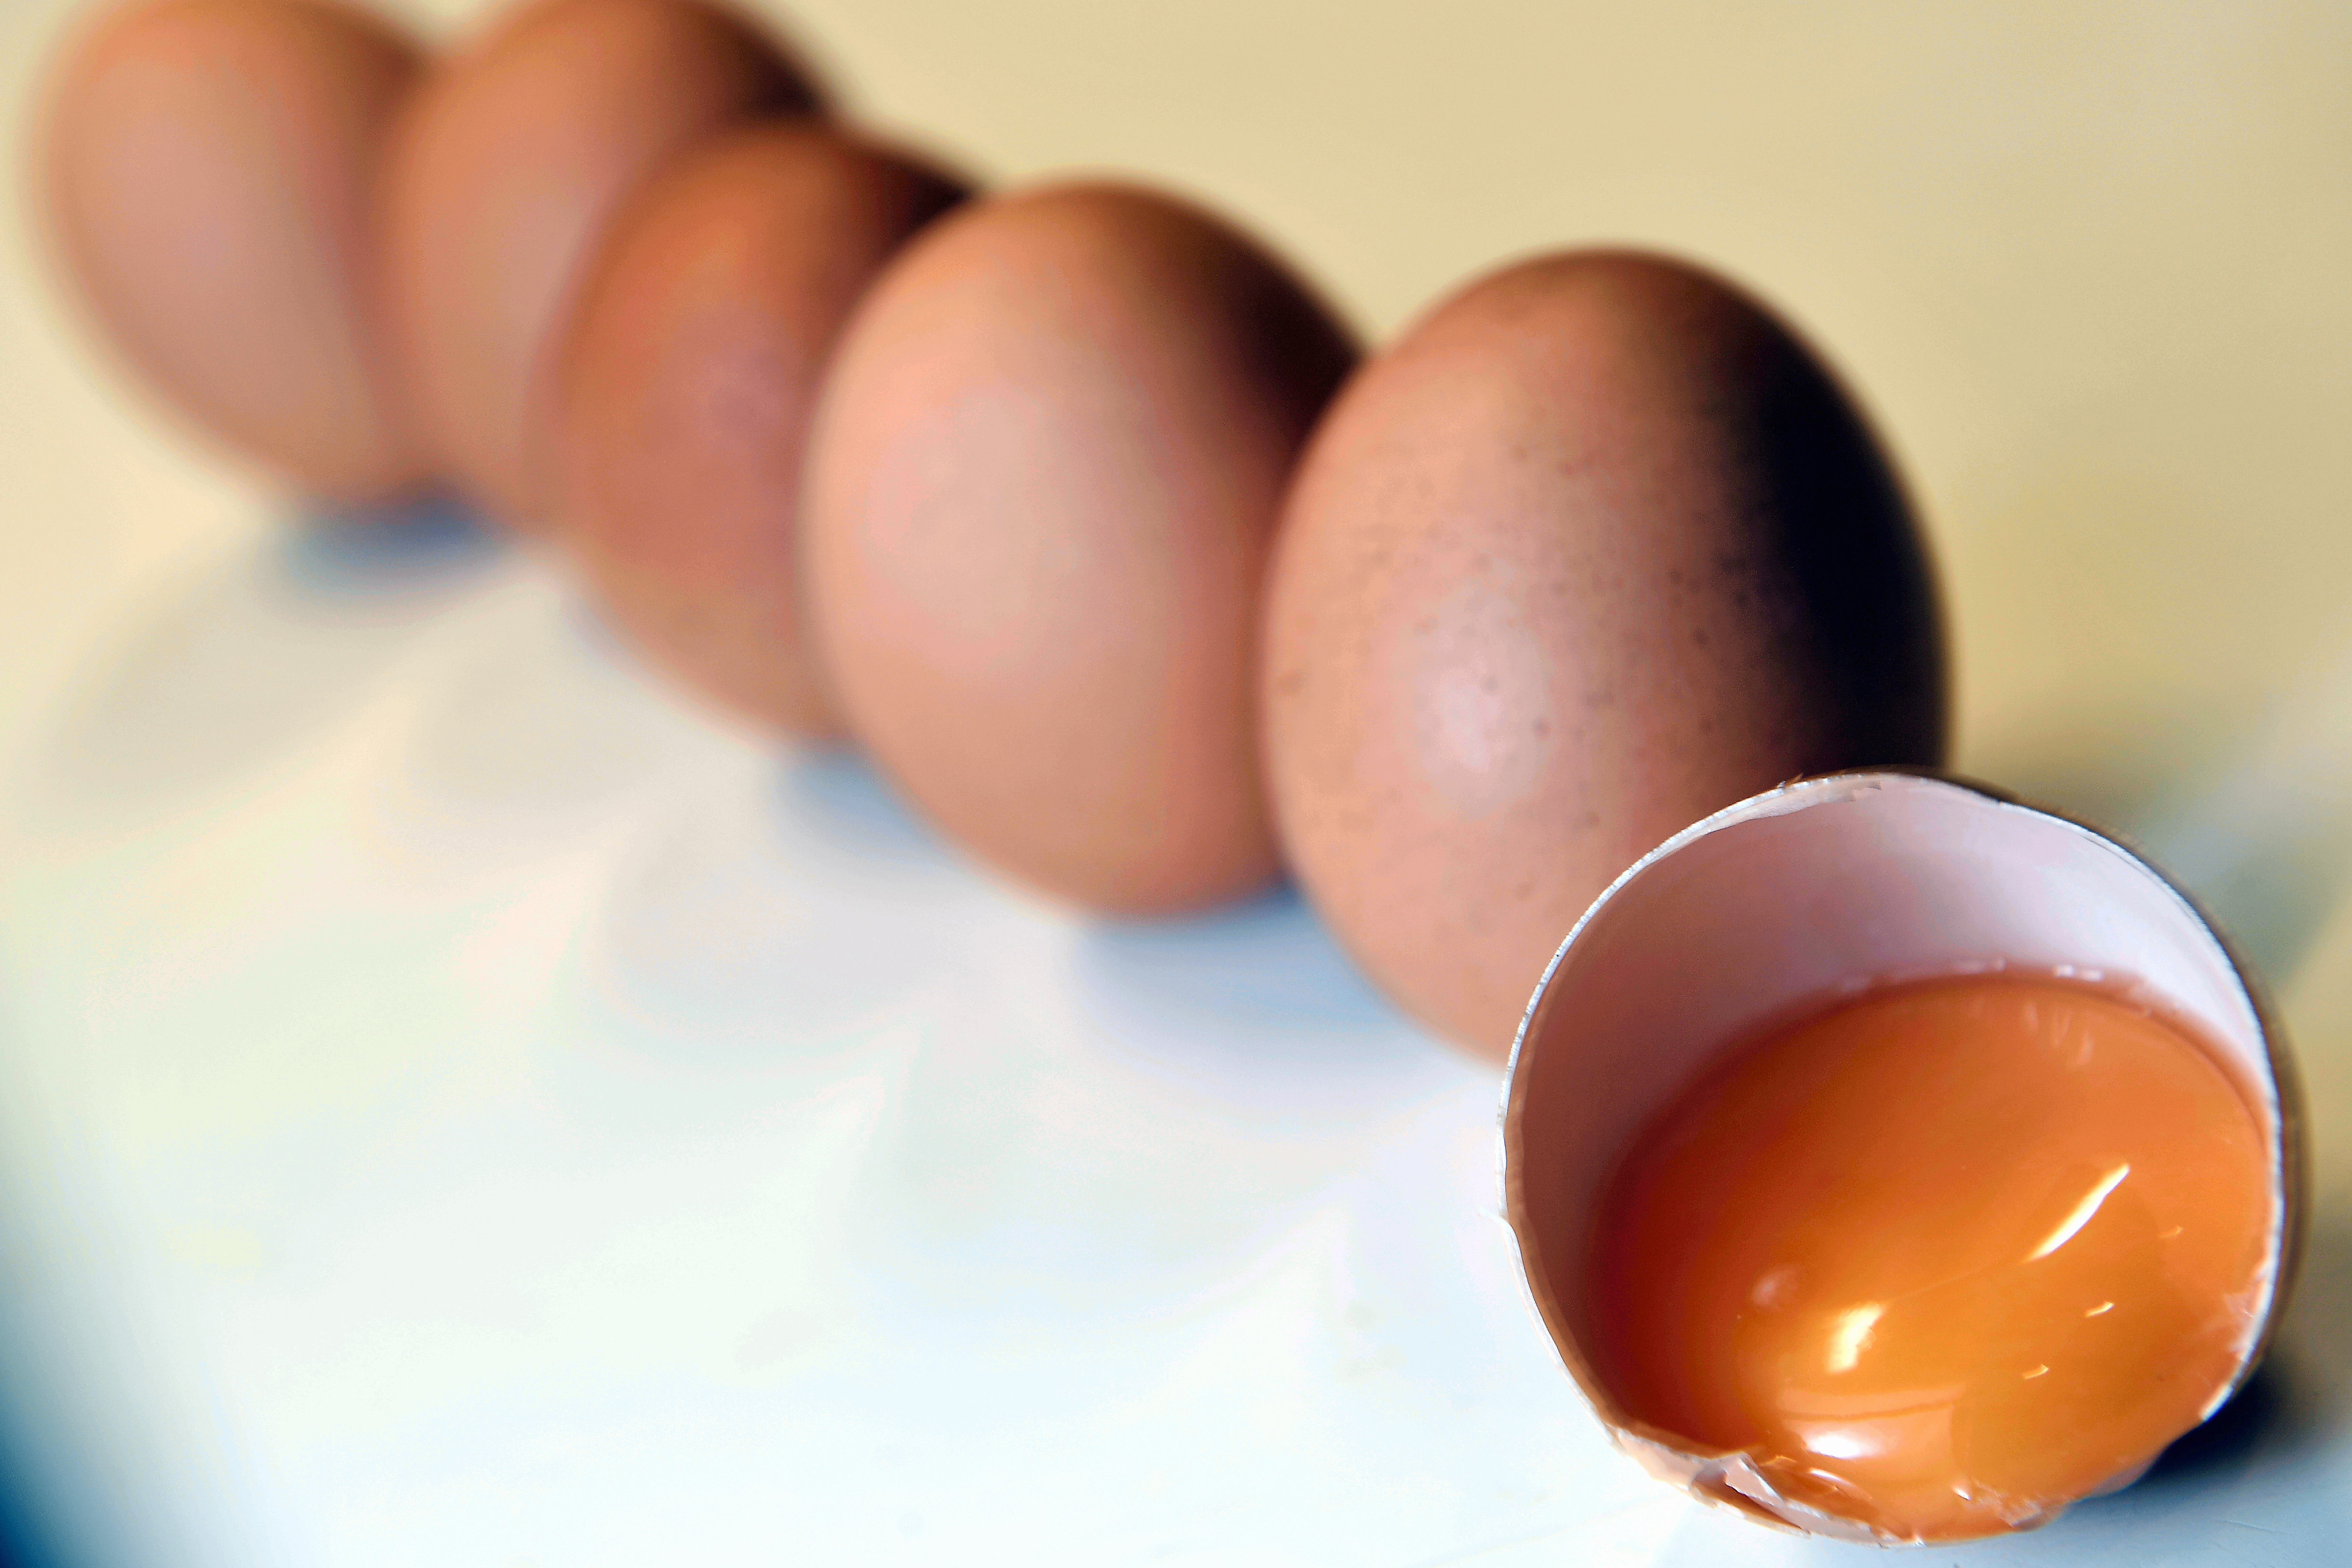 Just 2/5 of shoppers say they would be less likely to support a retailer if they used imported eggs in their products. But 85% would feel reassured if they saw the “Made with British Lion eggs” logo on packaging. Photo: Belga via ZUMA/REX/Shutterstock